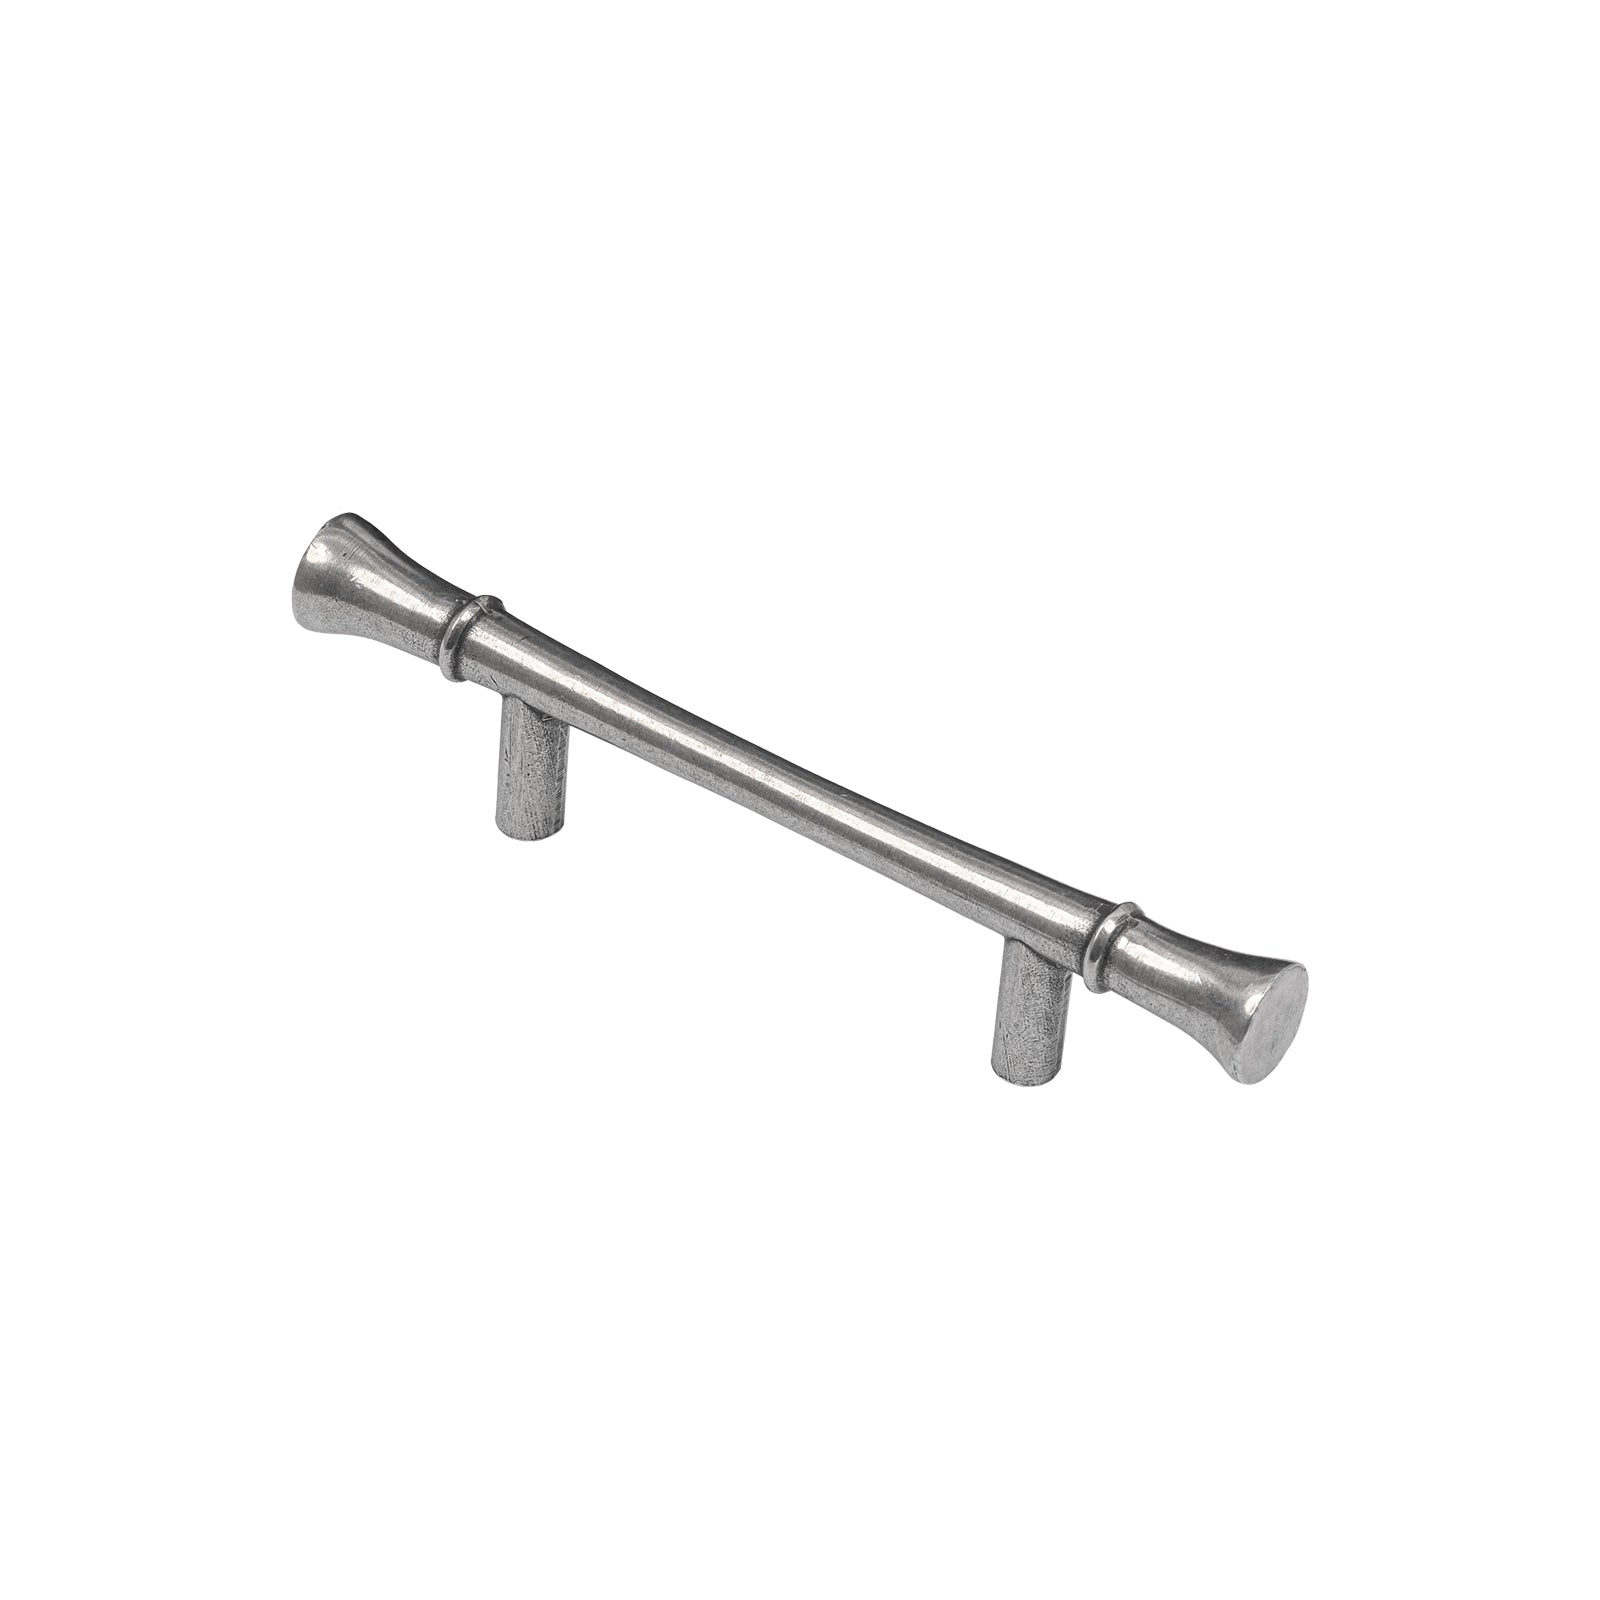 pewter cabinet handles, Finesse pewter, kitchen pulls, T bar pull handles, drawer handles, pewter cabinet furniture, solid pewter pulls